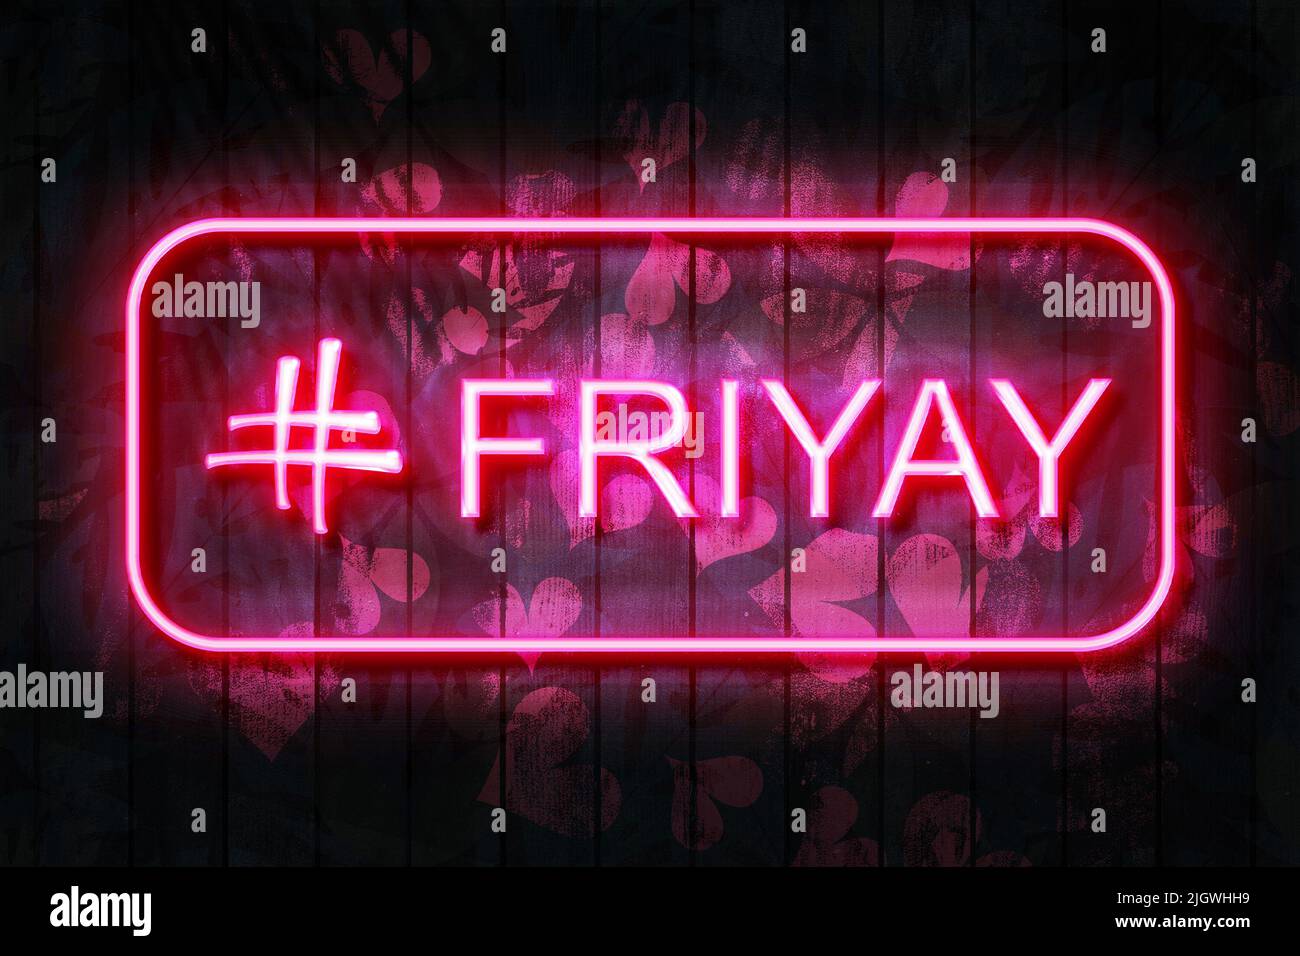 # Friyay neon sign on a Dark Wooden Wall 3D illustration with red heart background. Stock Photo